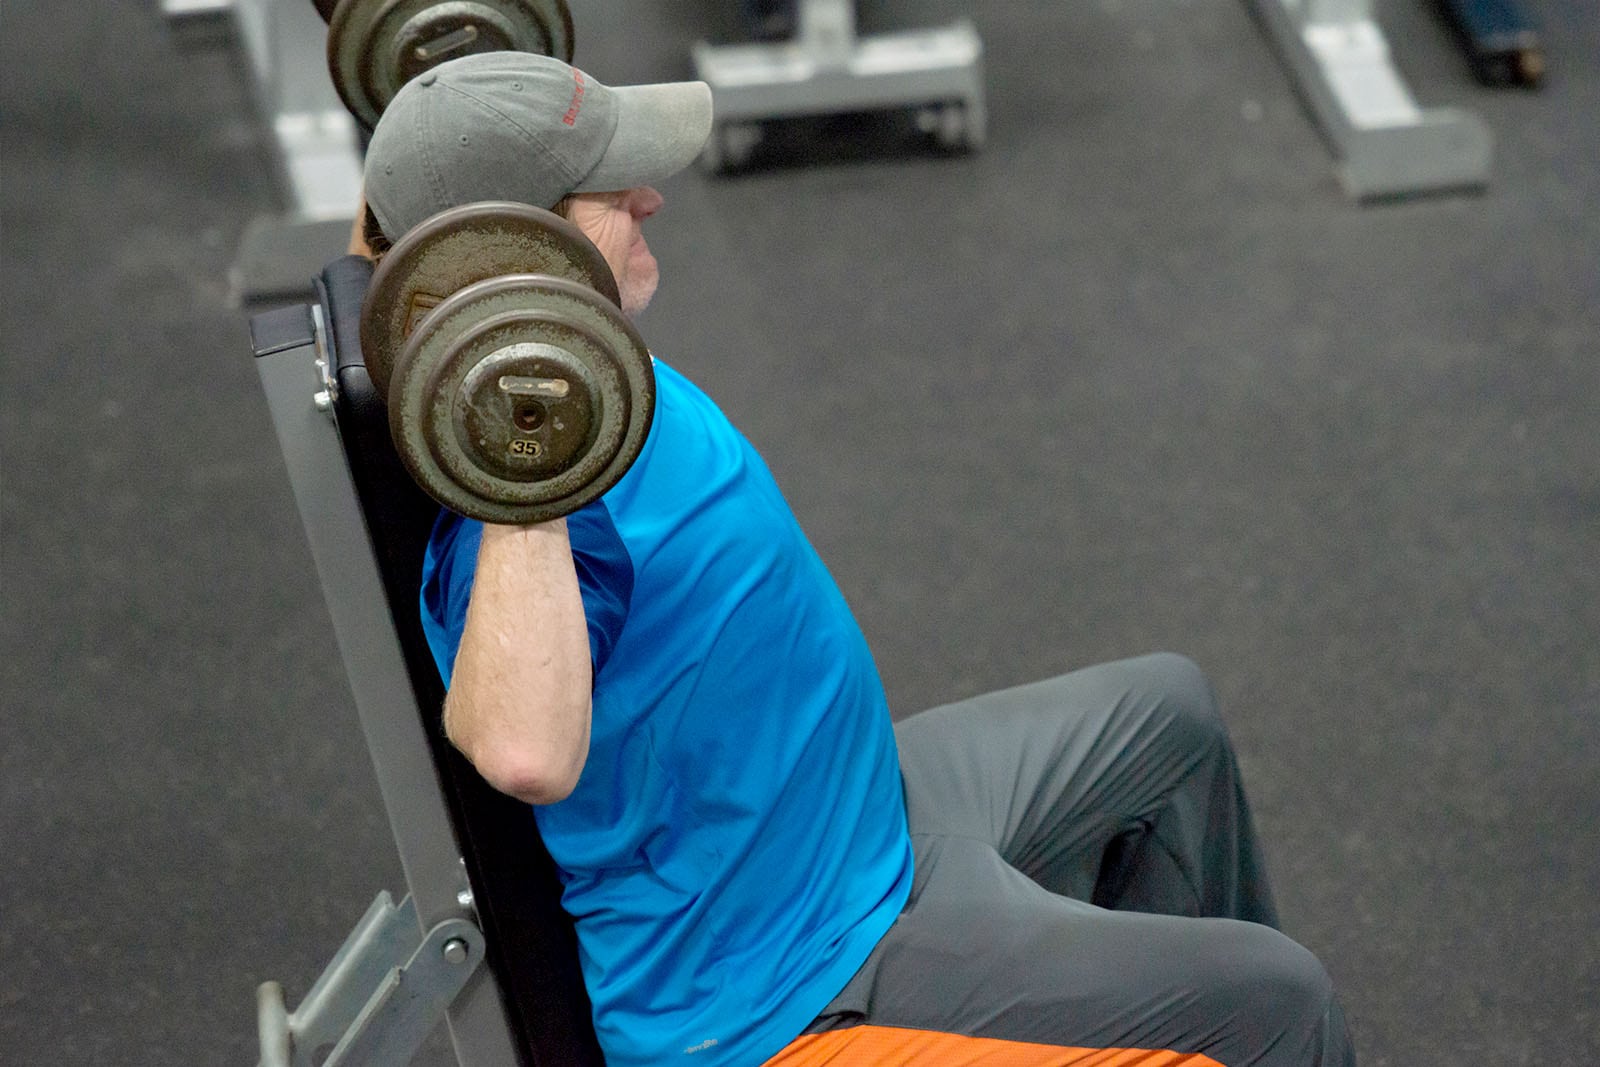 Man in blue shirt lifting weights while sitting